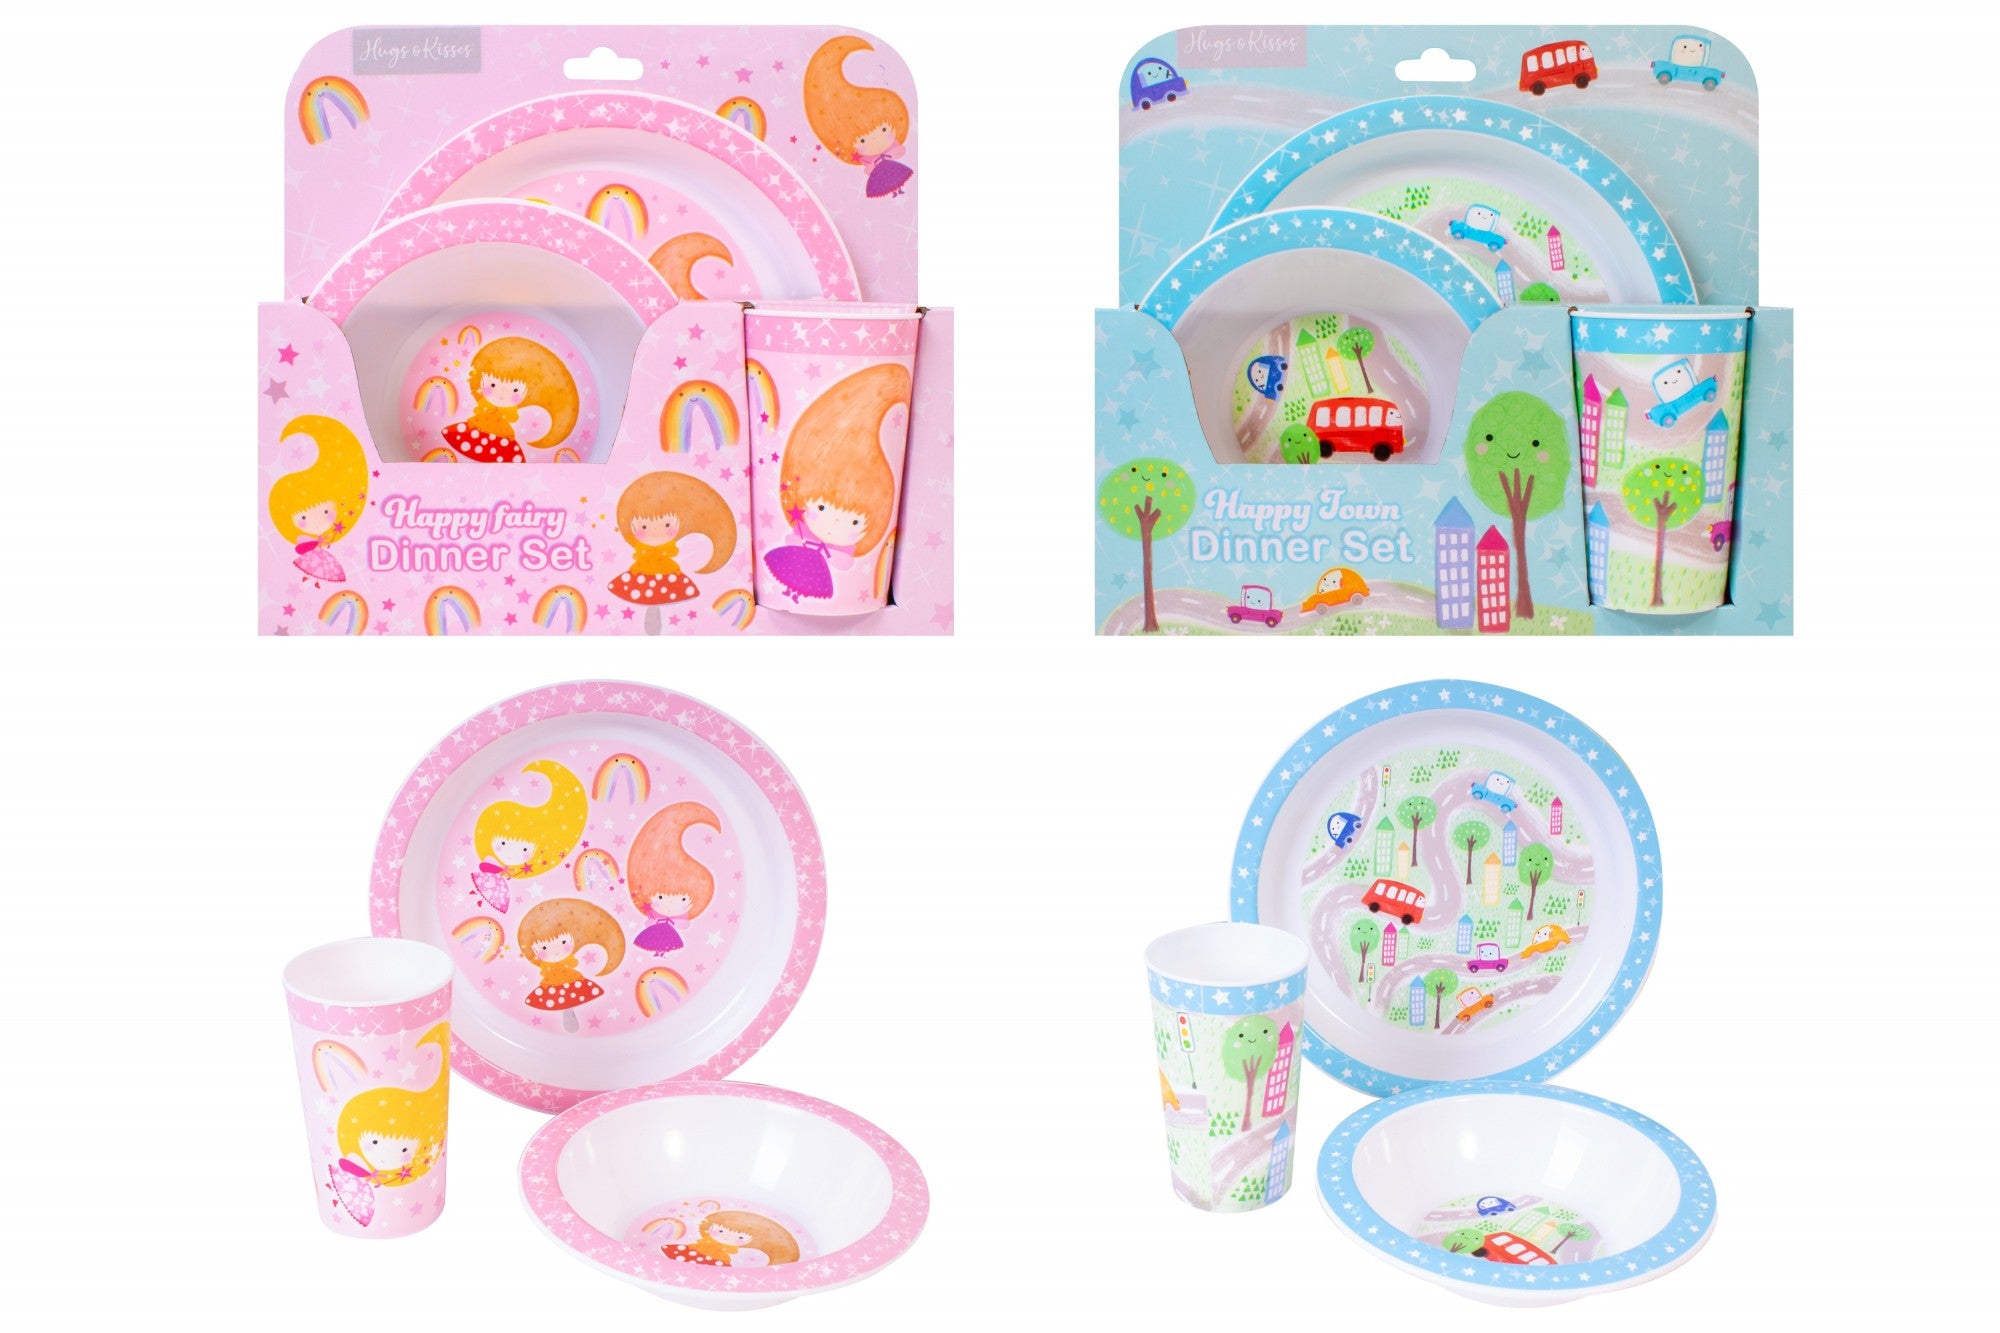 View Happy Town Dinner Set information